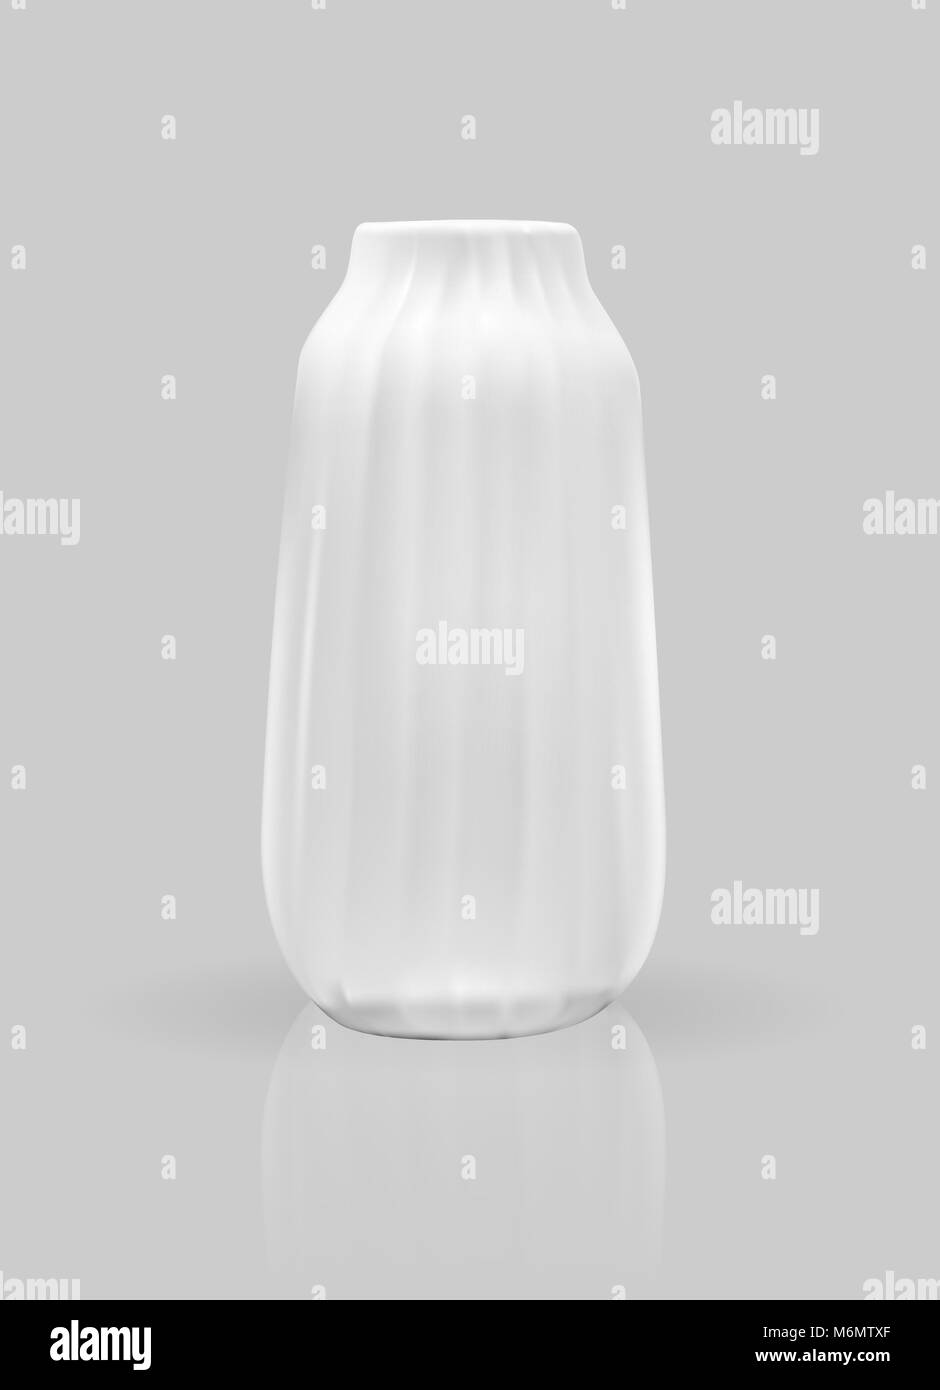 Realistic 3D model of vase white color on gray background. Vector Illustration. Stock Vector